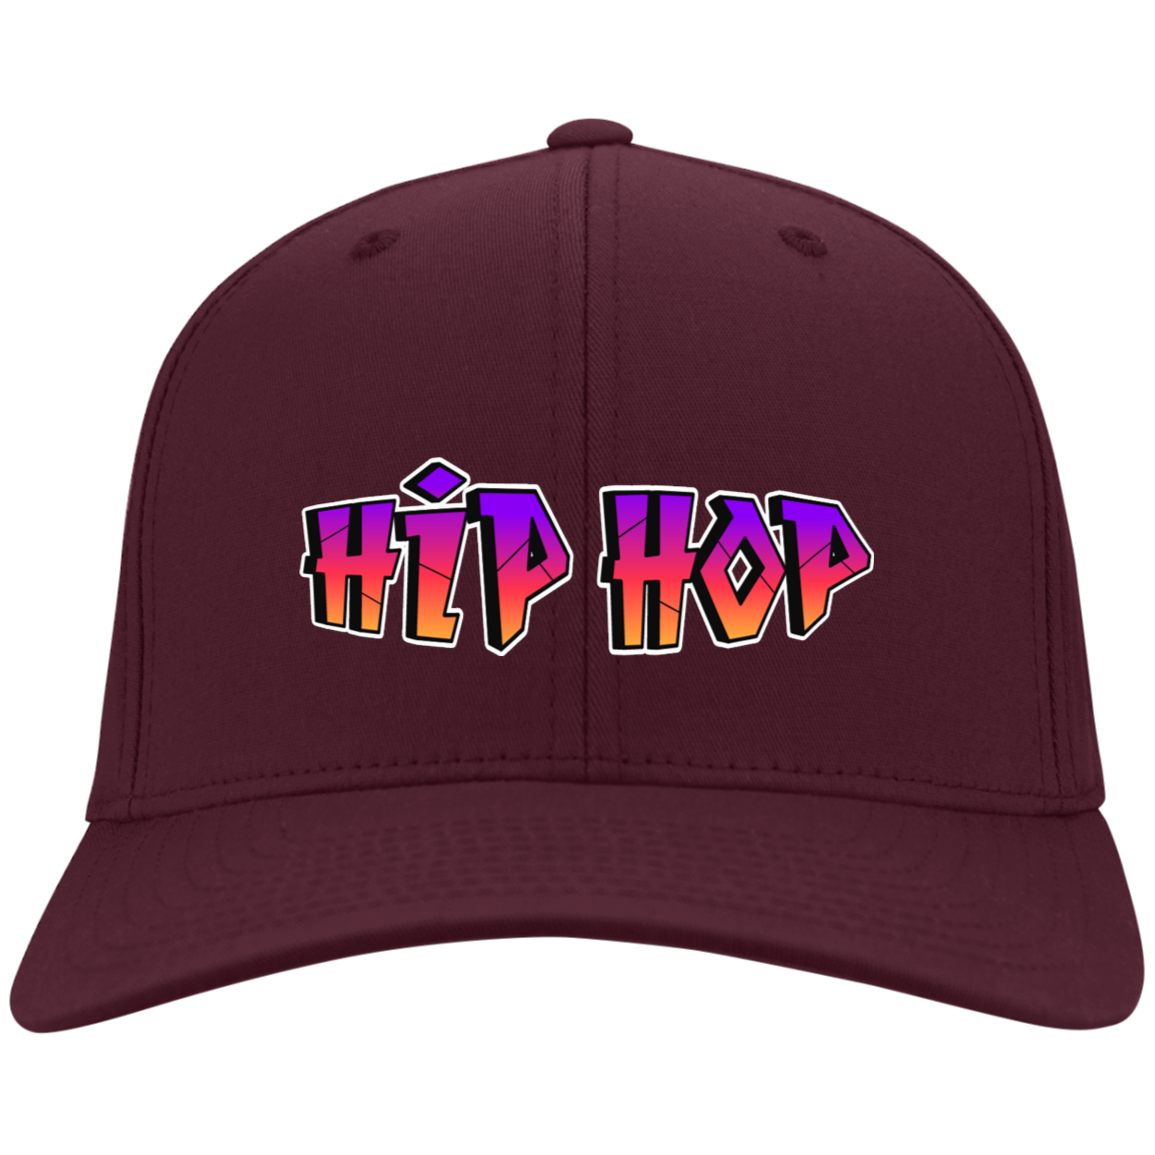 HipHop Embroidered Flex Fit Twill Baseball Cap